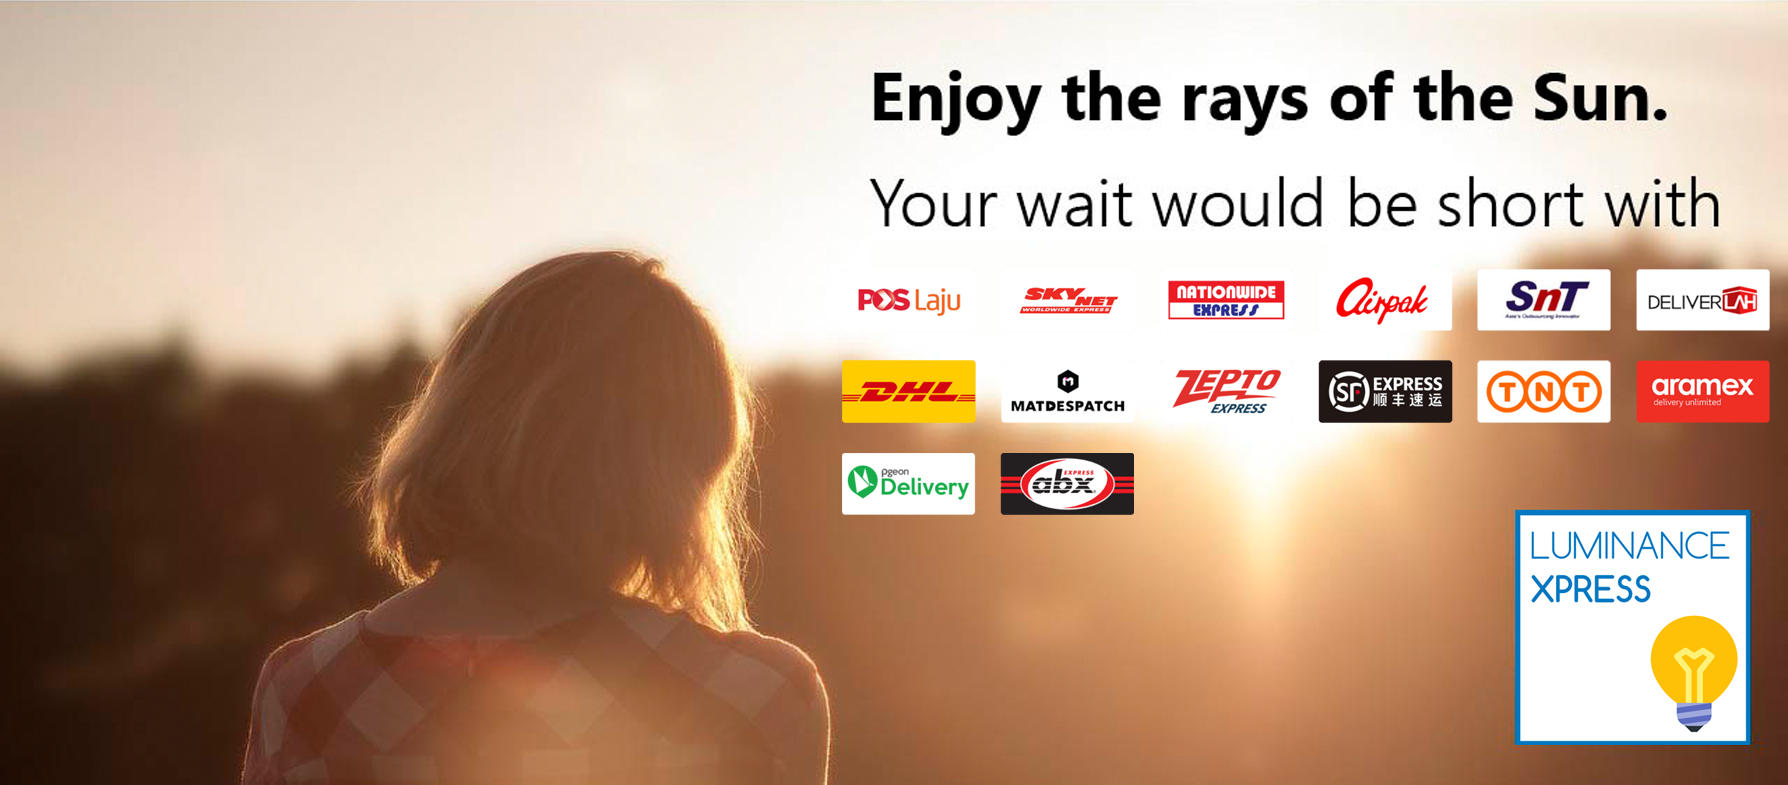 Fast Delivery. Enjoy the rays of the sun.